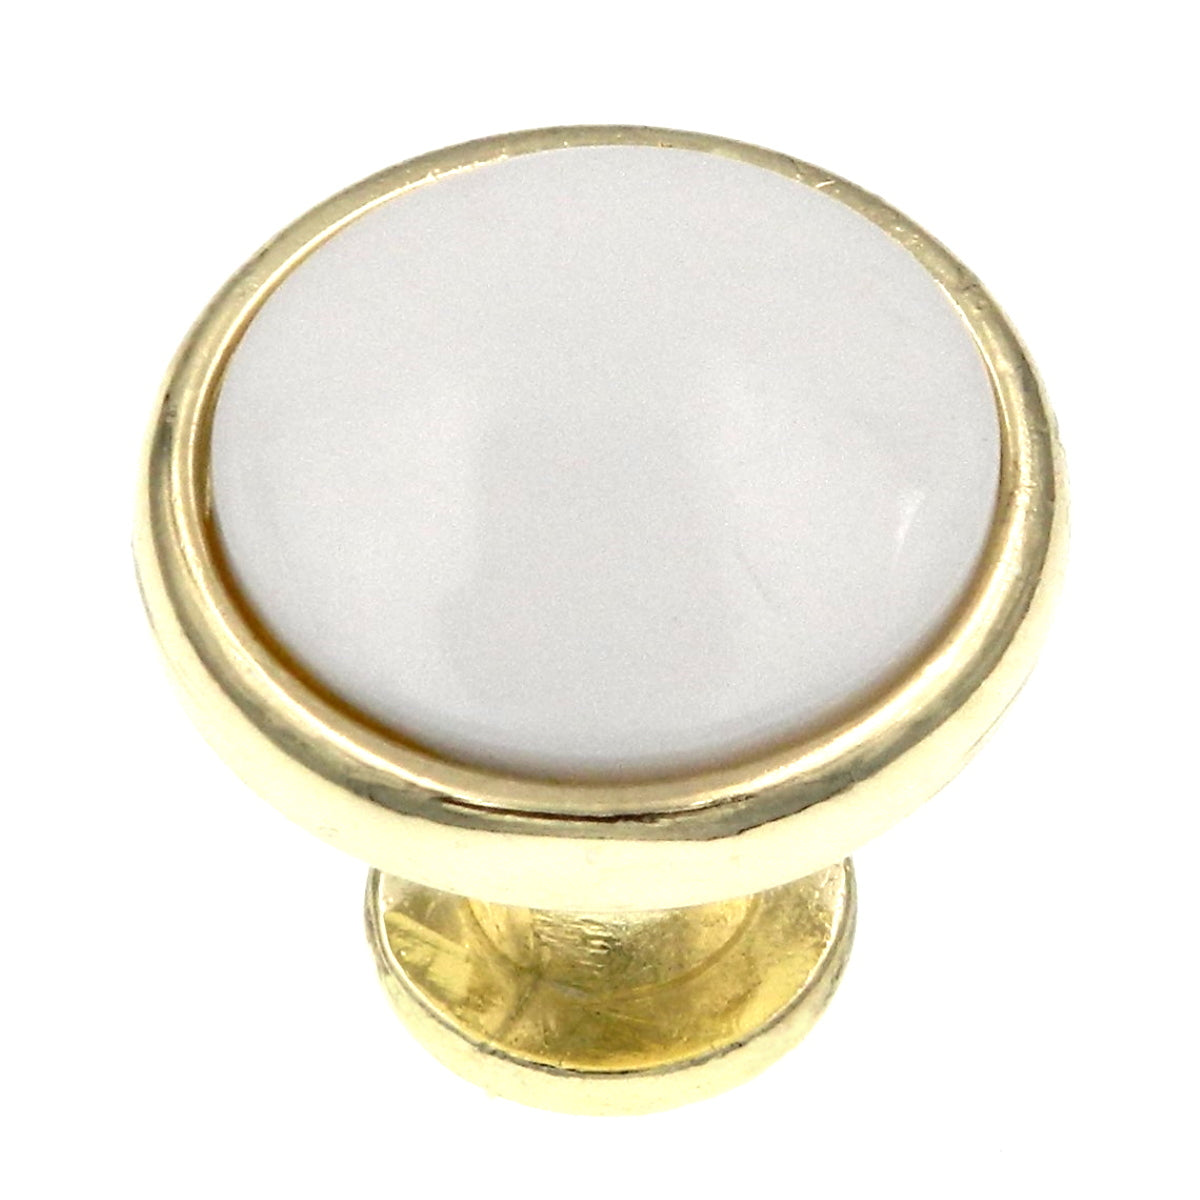 10 Pack Belwith Keeler P419-W Solid Brass, White Center 1 1/8" Cabinet Knob Pull